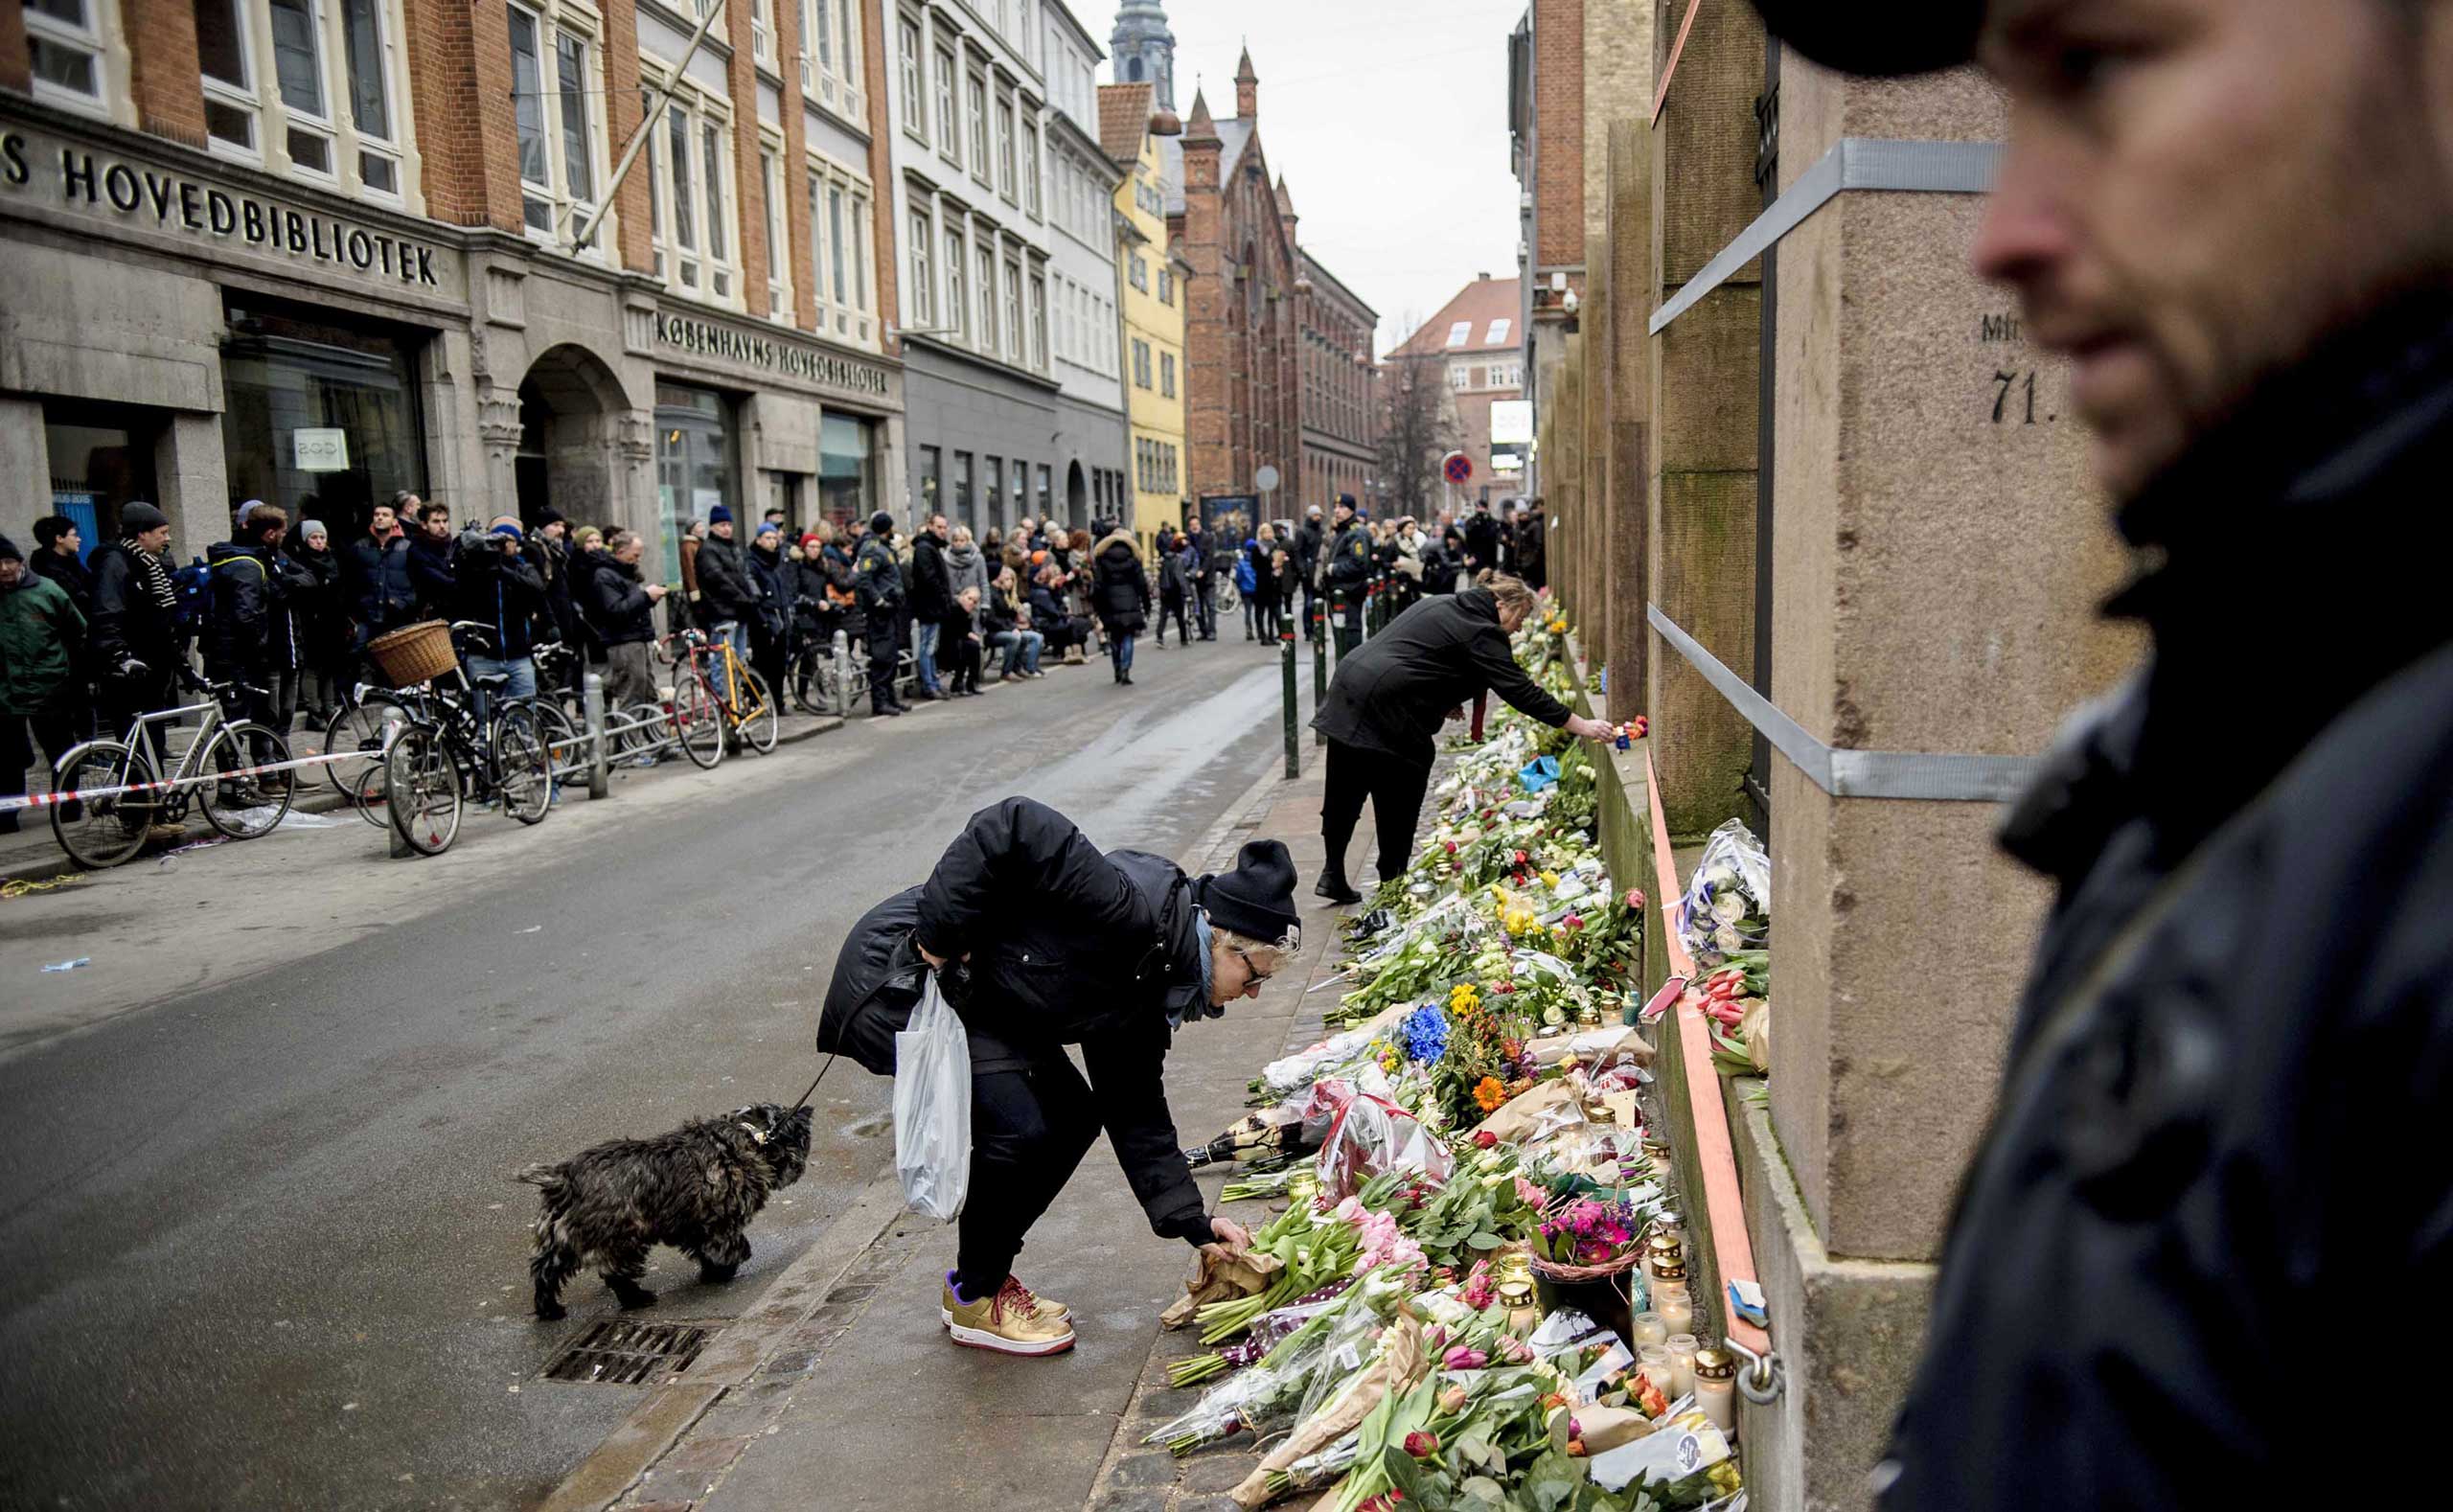 People lay flowers outside a synagogue where an attack took place in Copenhagen on Feb. 15, 2015 (Rumle Skafte—AP)